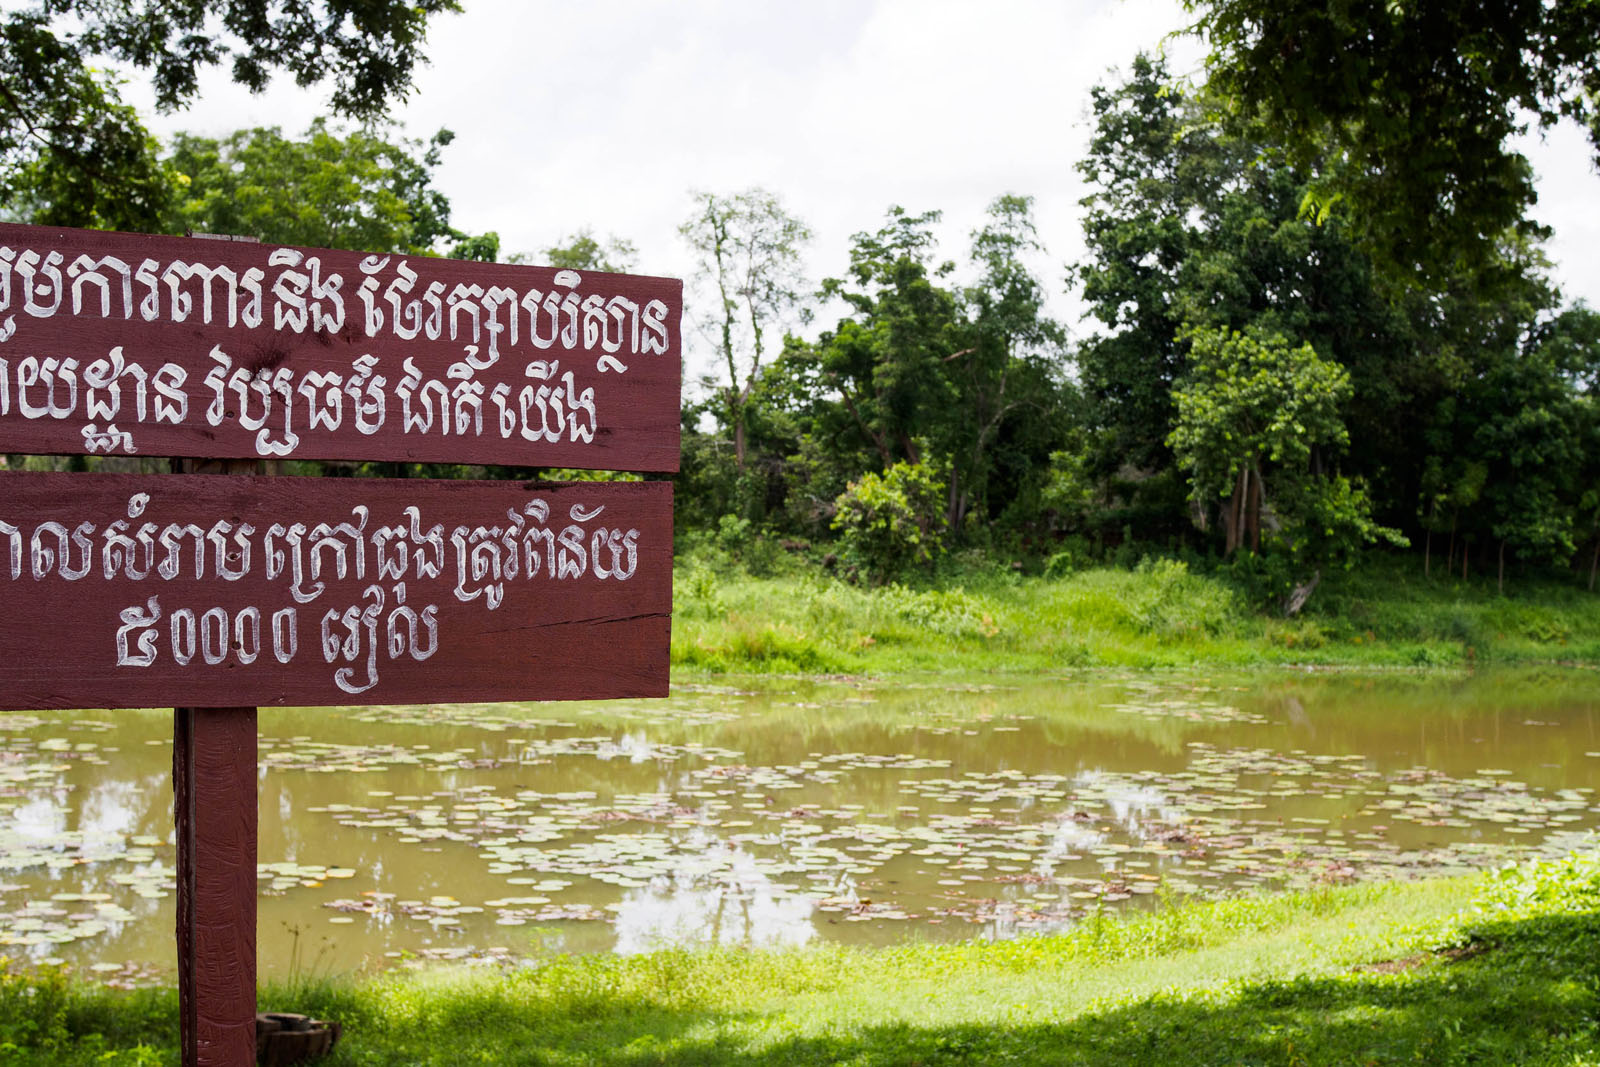 The moat is the first thing most people see when entering Banteay Chhmar. This sign encourages people not to litter and to keep the area clean. Photo by Emily Lush